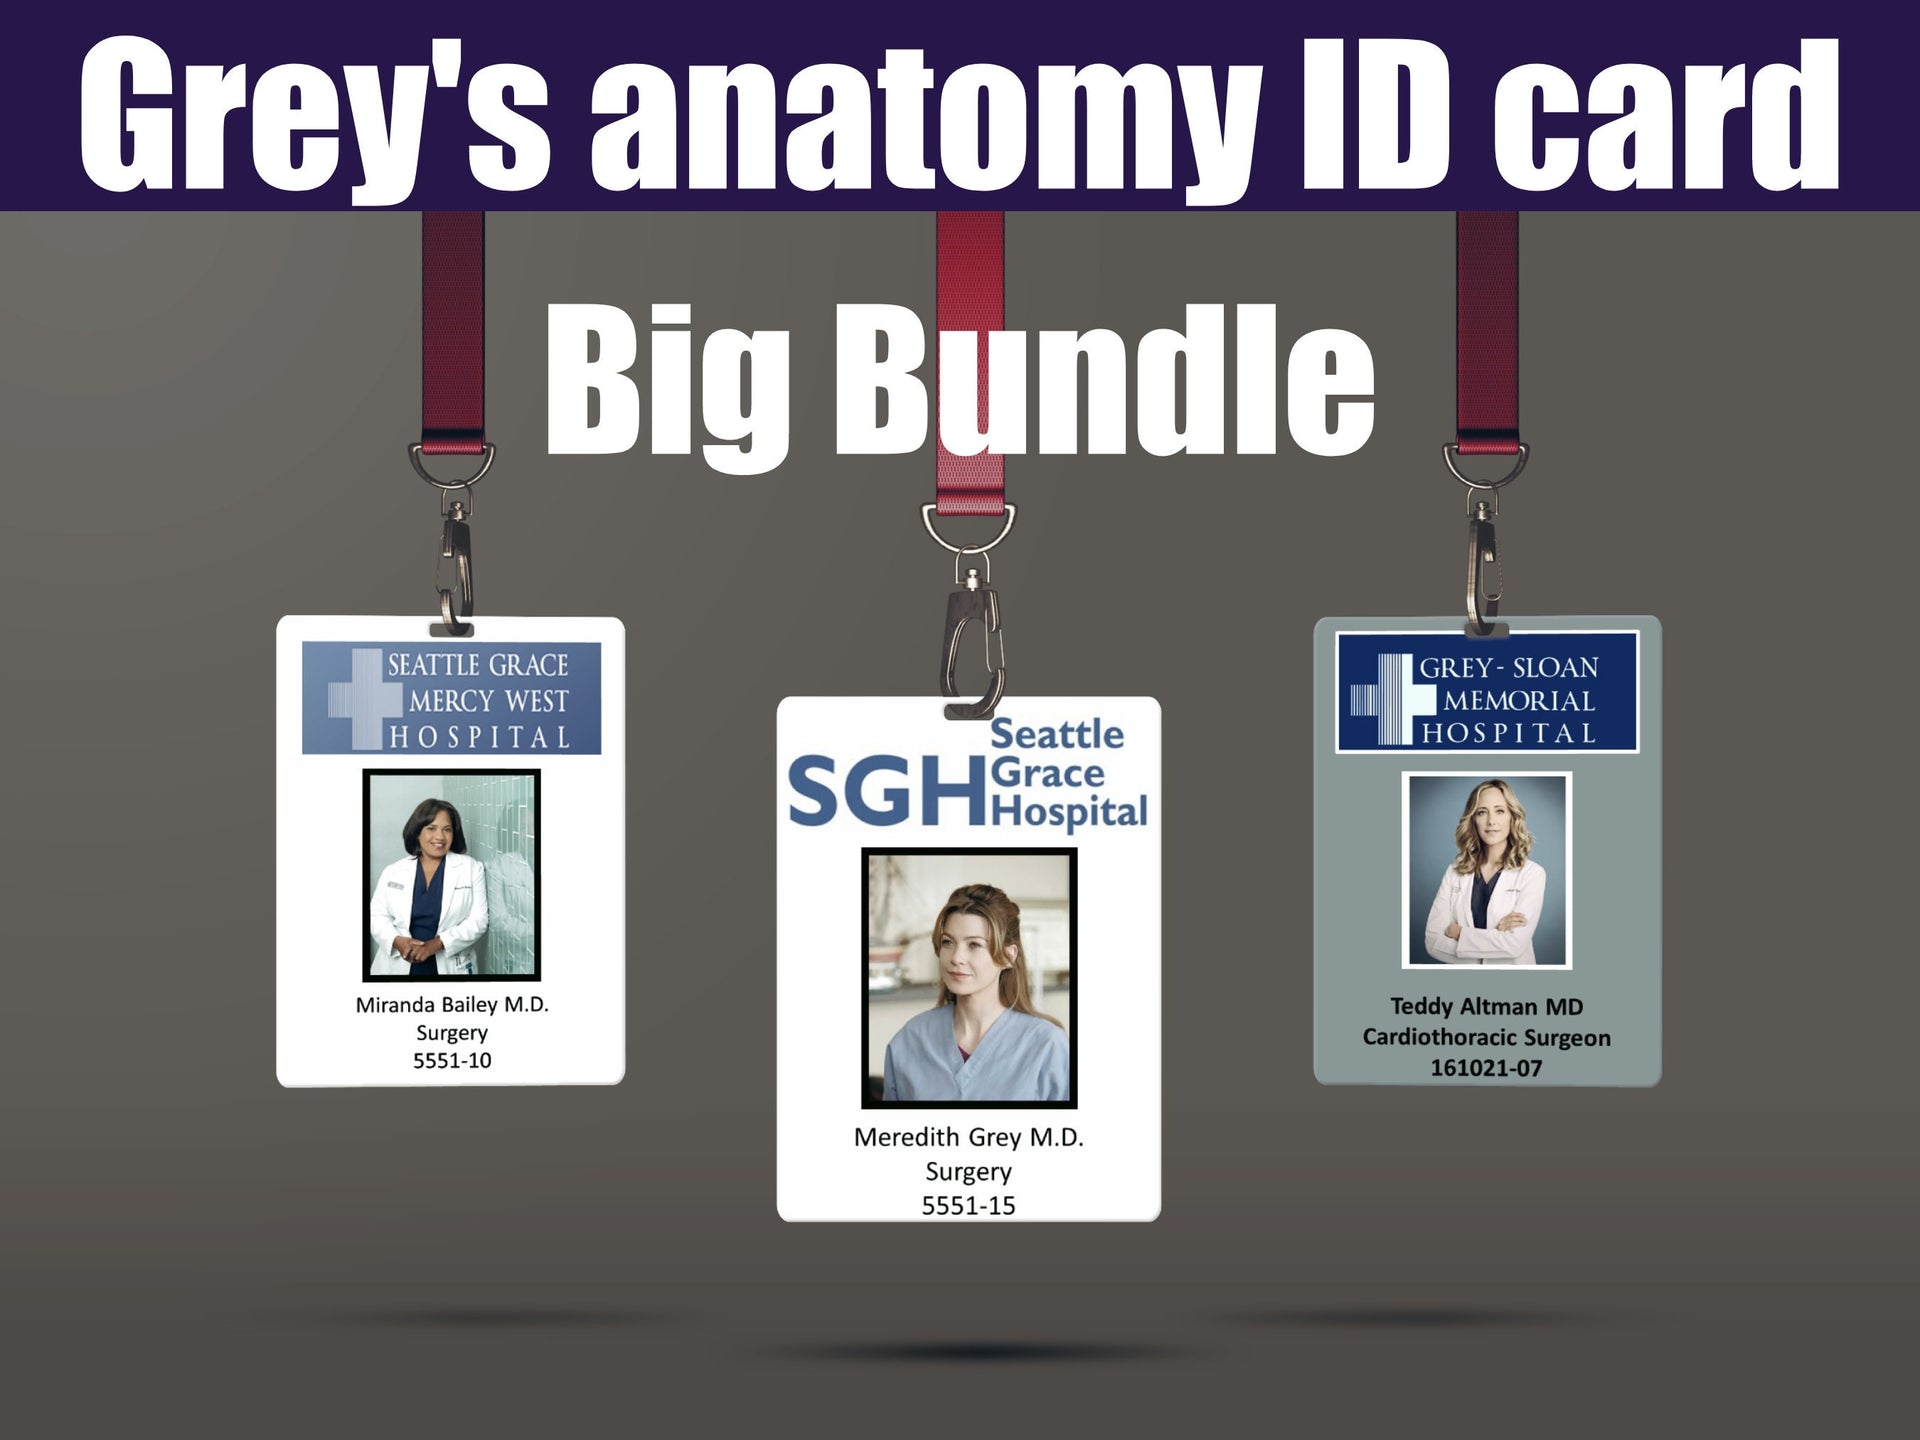 GREY'S ANATOMY ID cards. – TV Gifts and Love